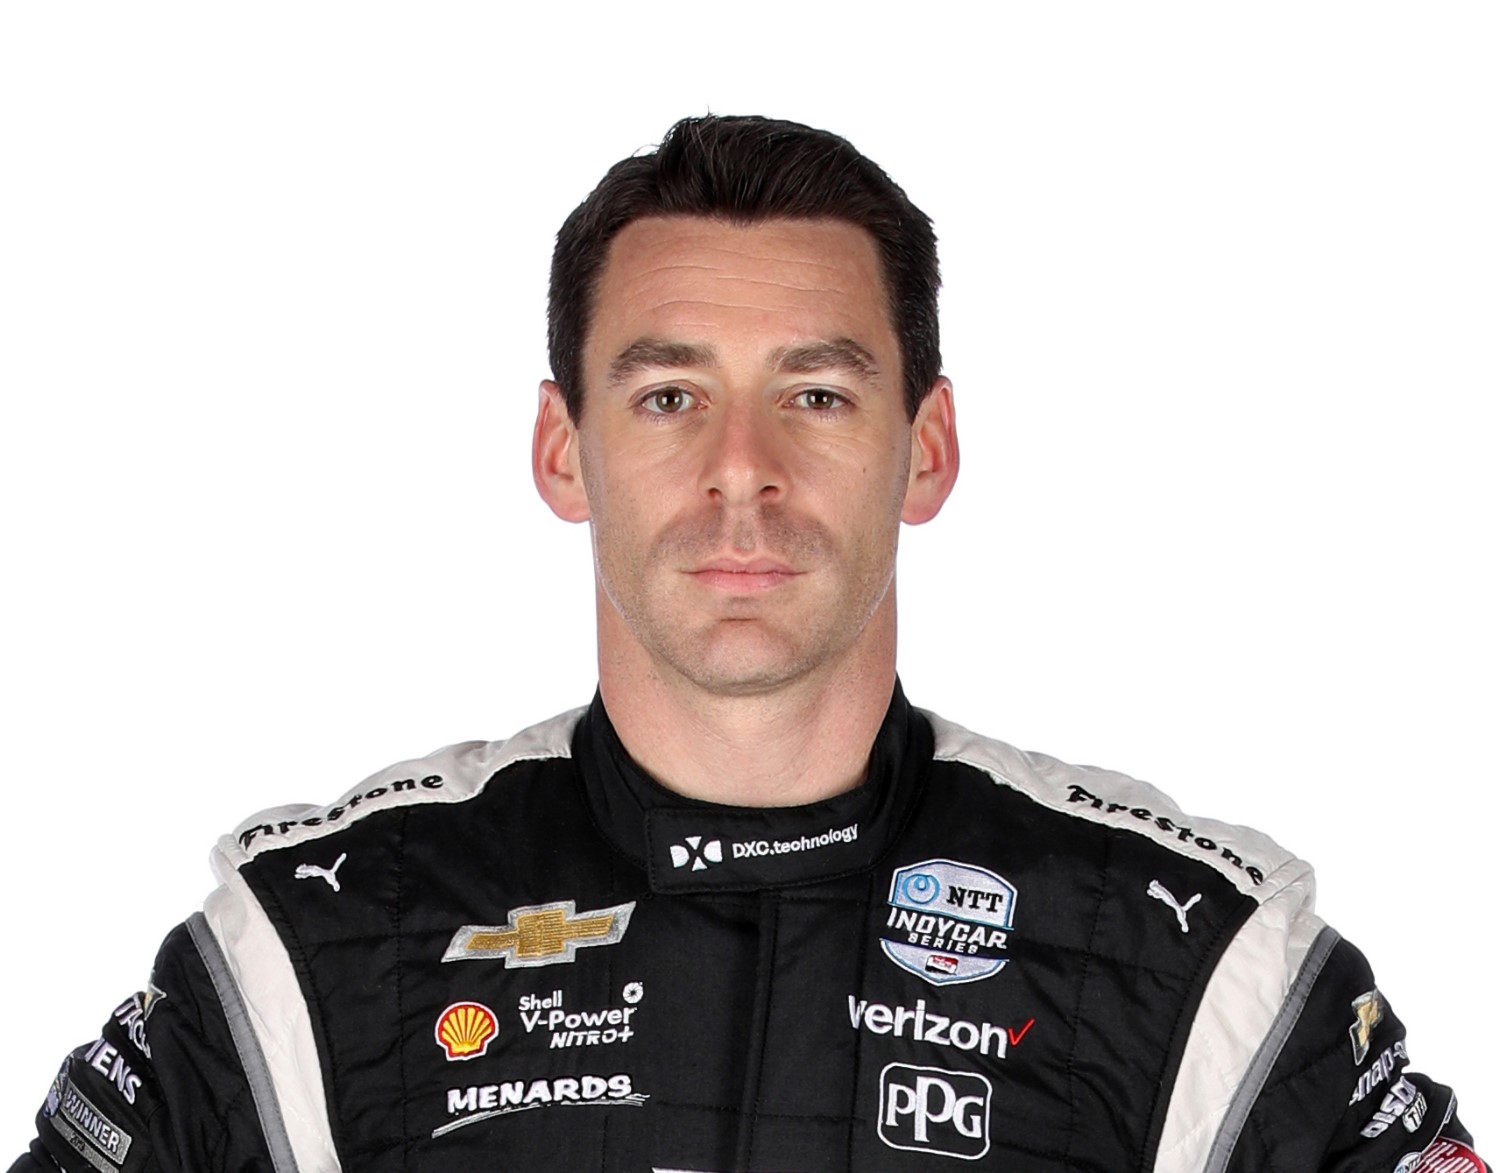 The negative damage Pagenaud's unprofessional move did to IndyCar's reputation has been significant. The global outcry far reaching